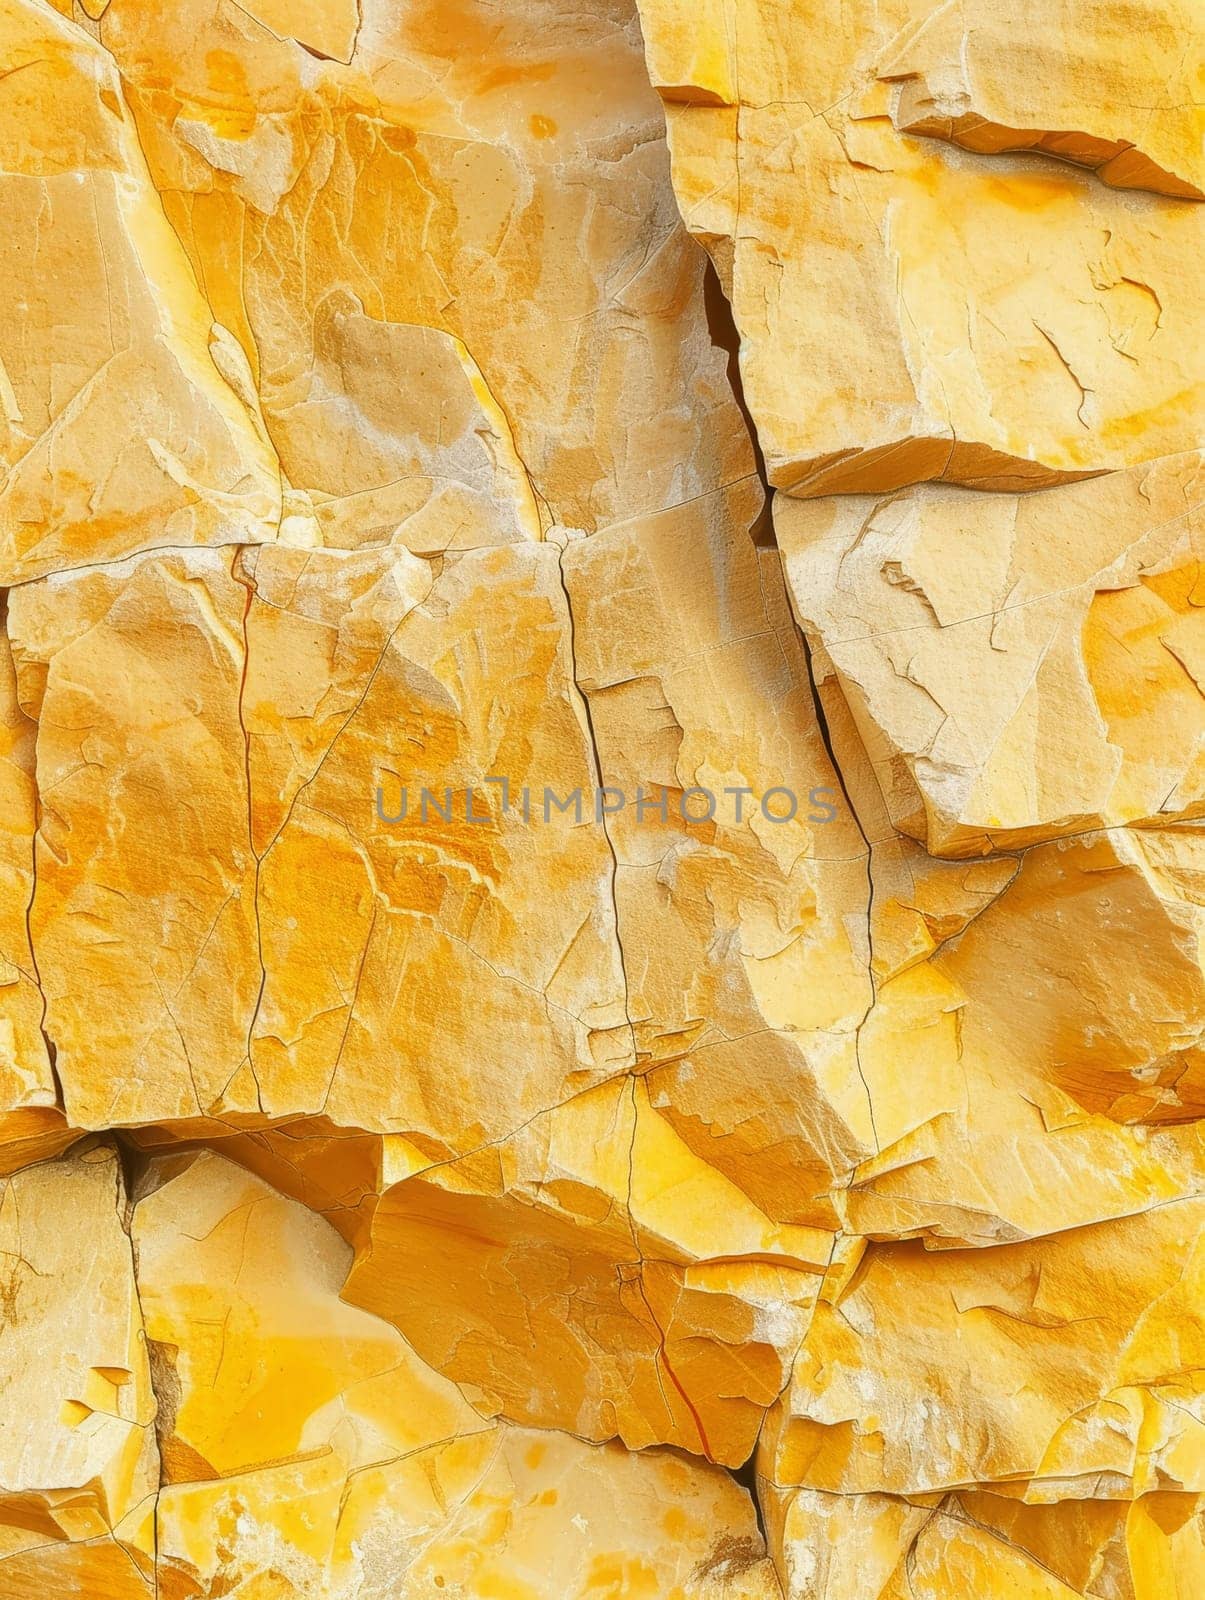 Sunlit textured pattern of yellow stones with shadow play, creating a vibrant and dynamic surface. by sfinks